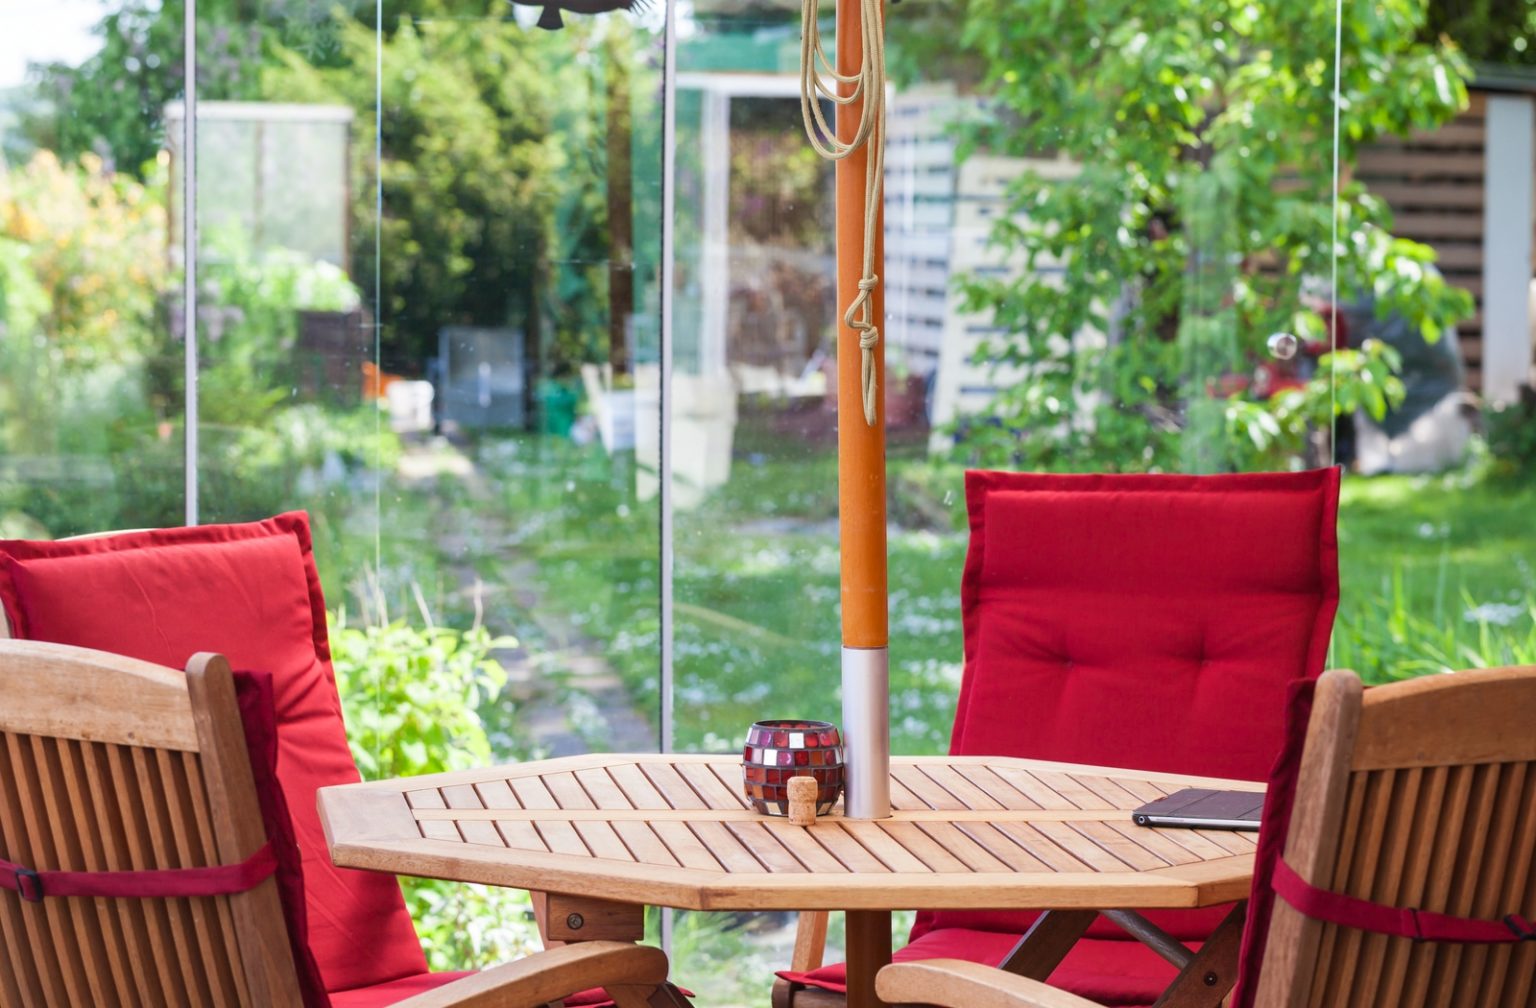 A teak outdoor patio furniture set with four chairs with bright red cushions surrounding a table